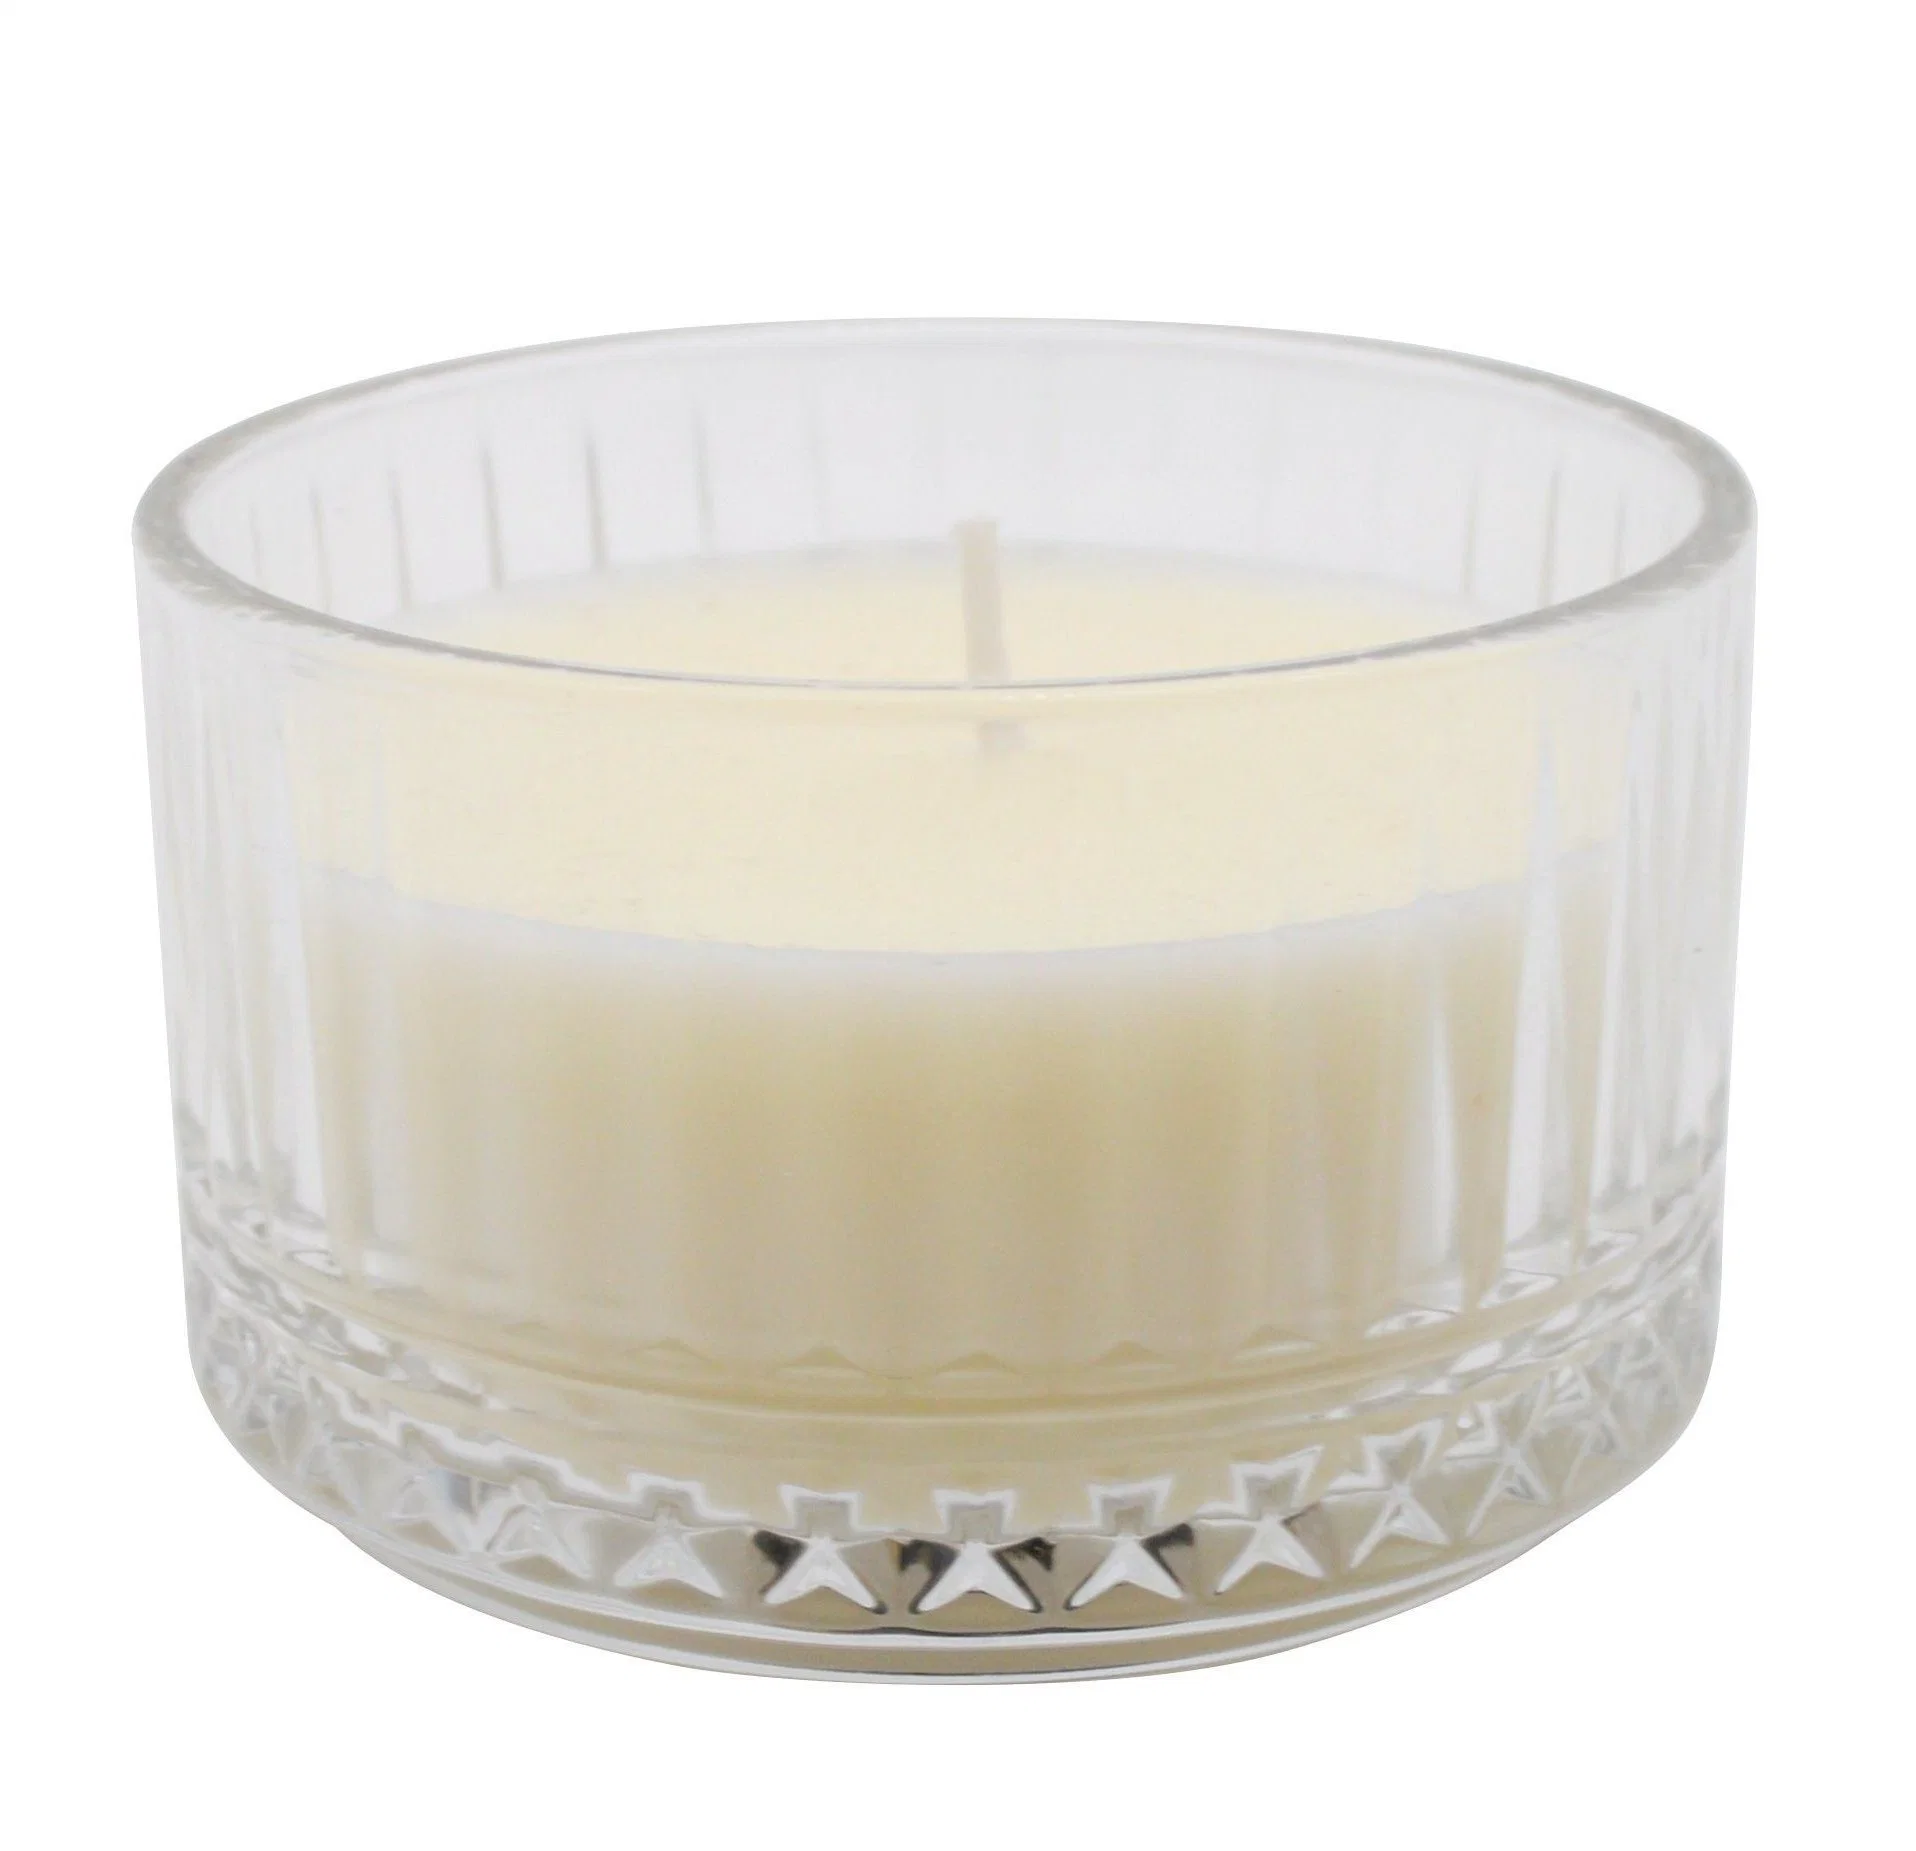 Transparent Glass Luxury Christmas Scented Candles Aromatherapy Aroma Diffuser Soy Wax Candles